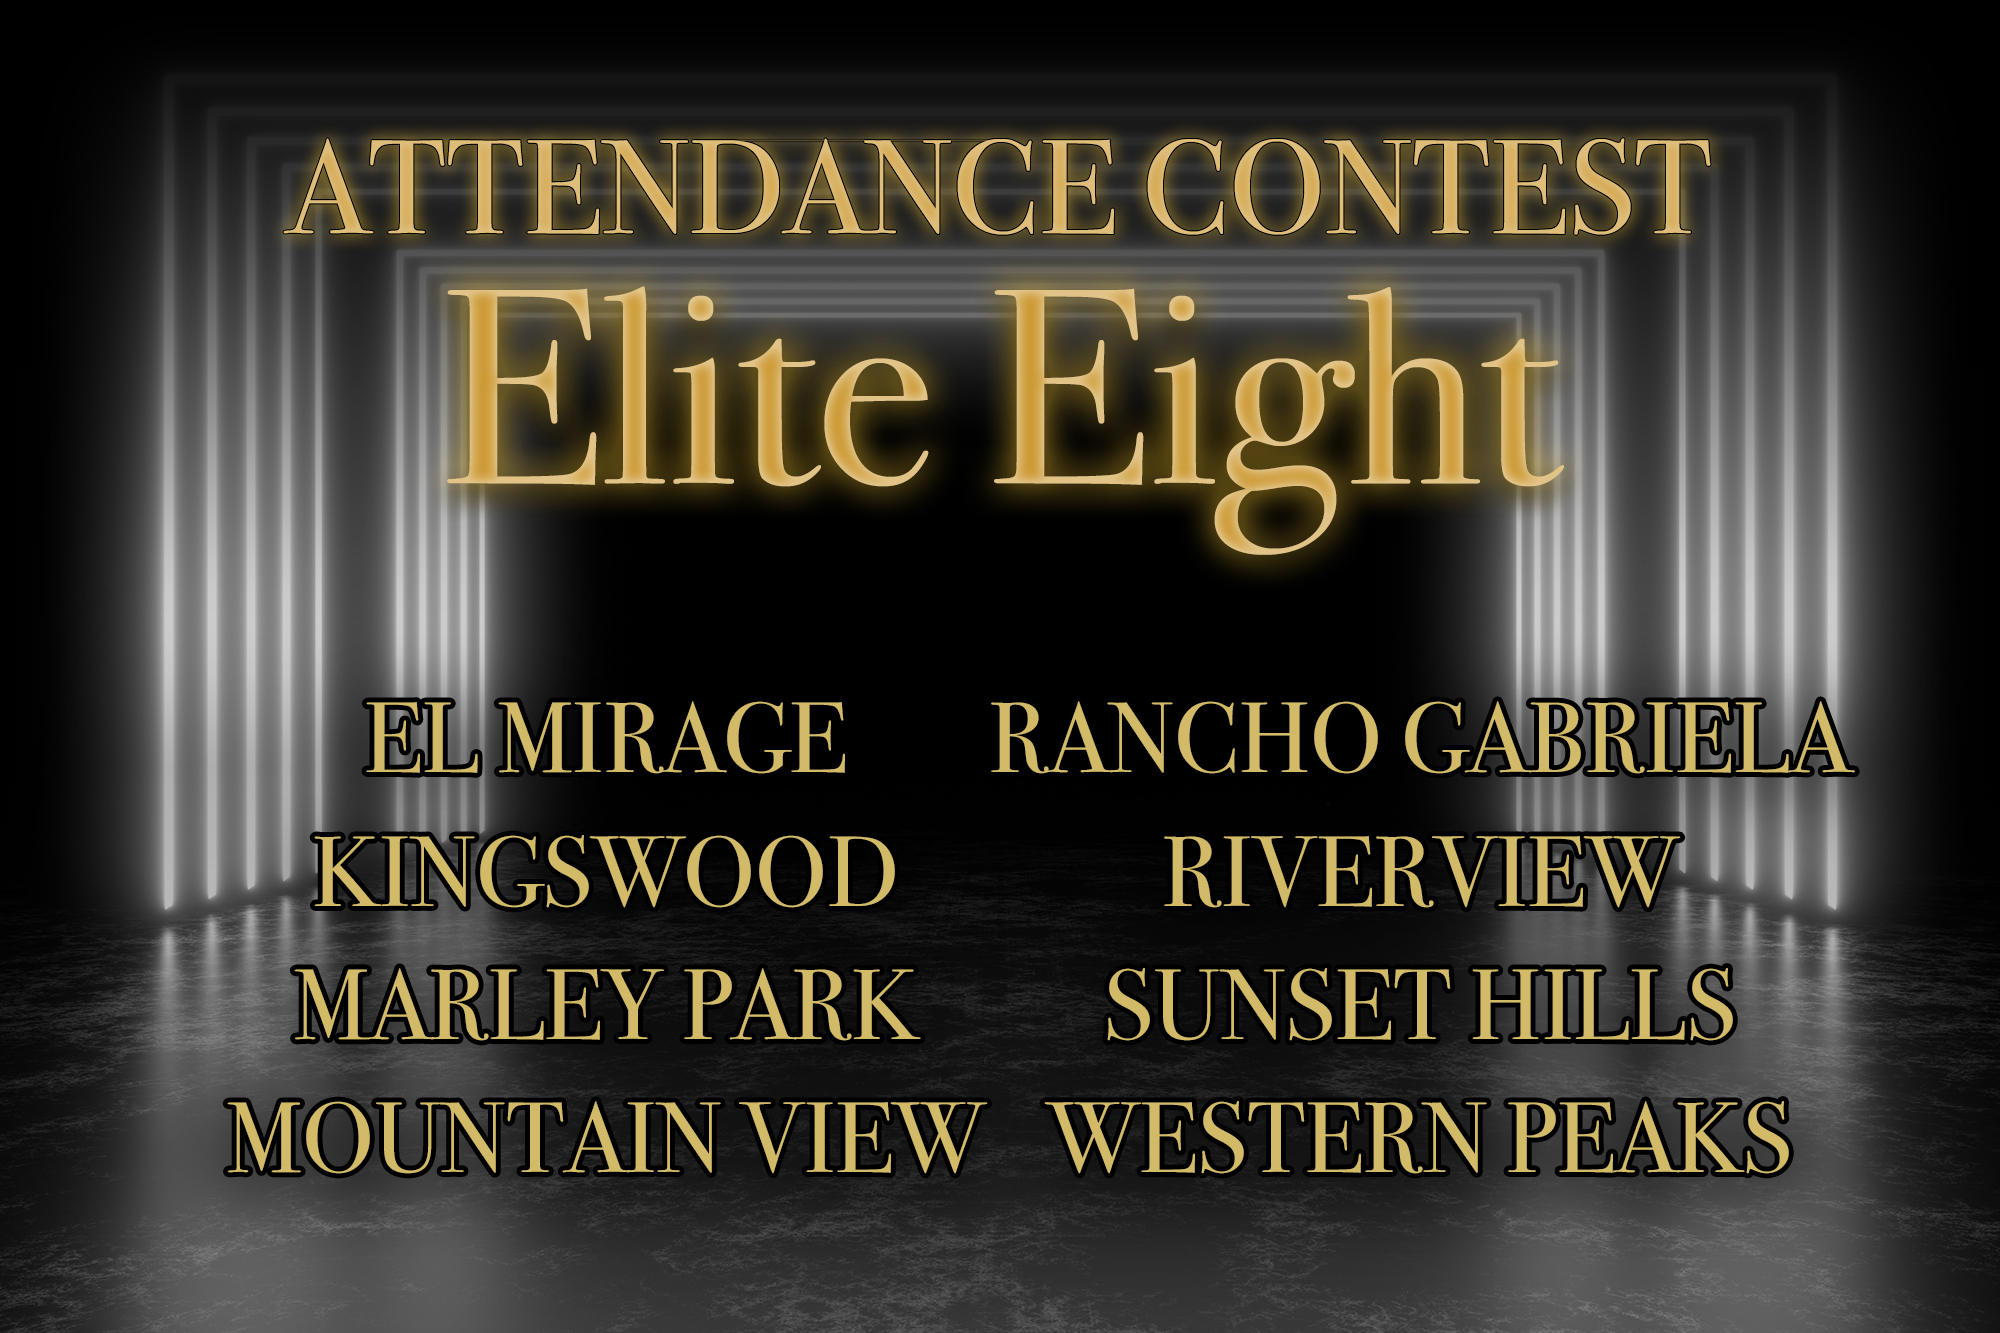 Attendance Contest Elite Eight flyer with schools listed